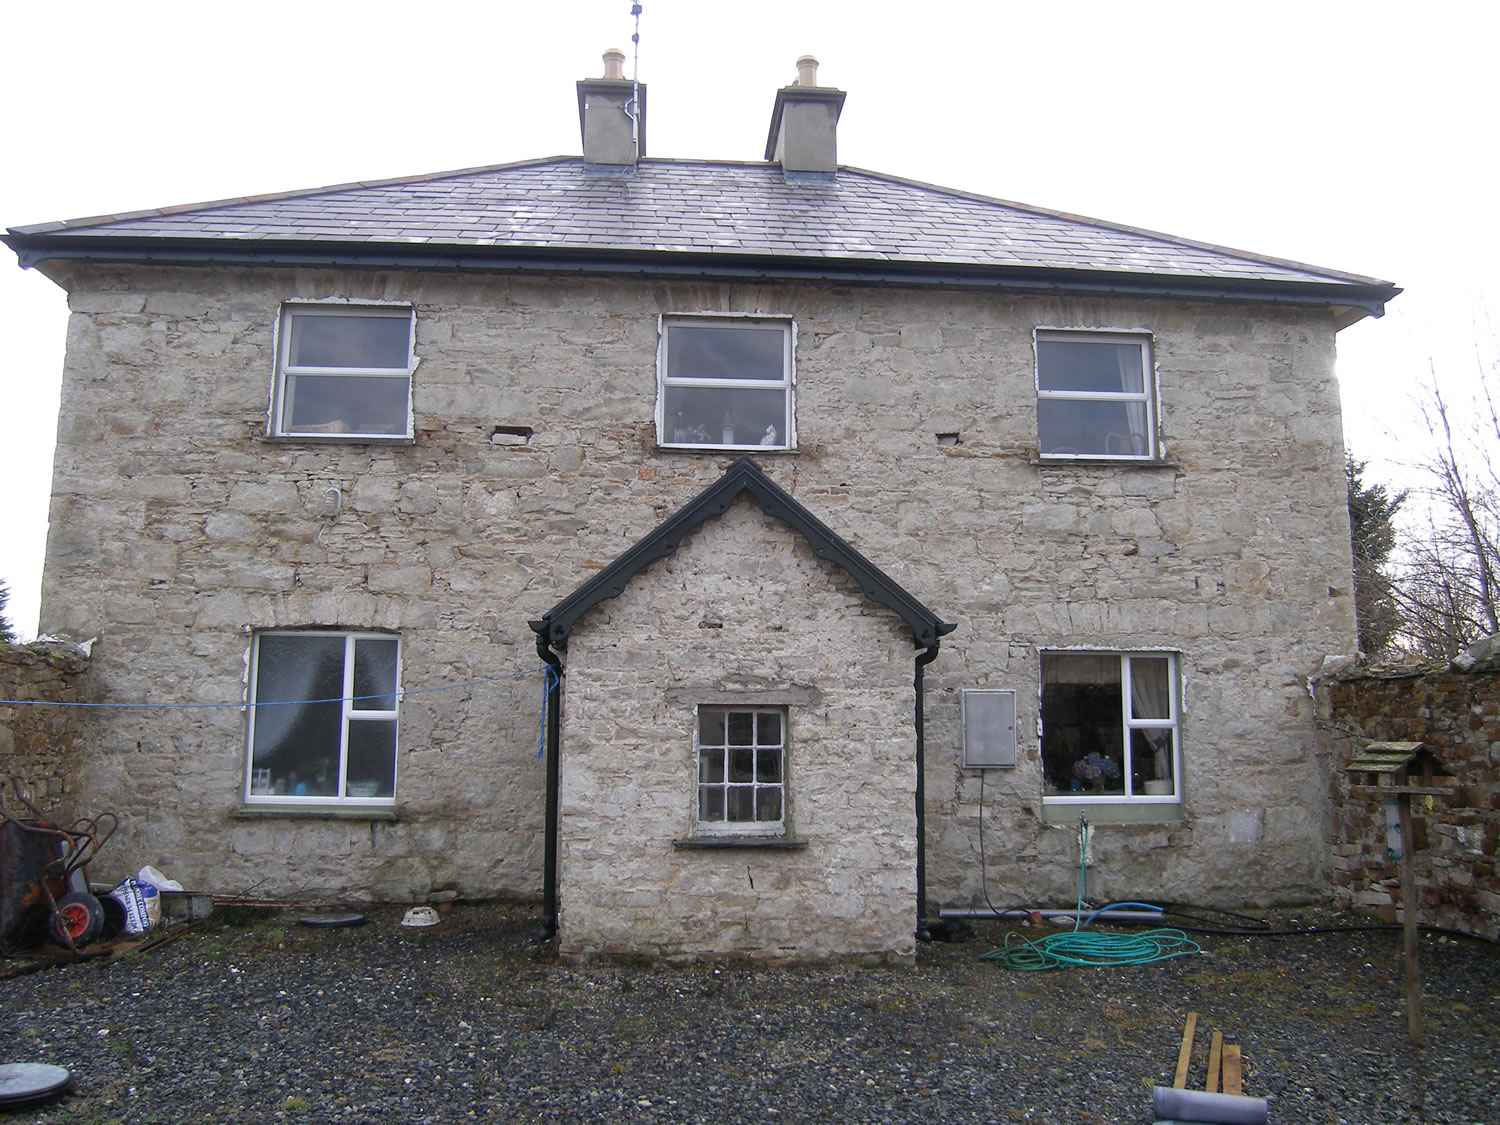 Early 19c Factors House At Ards, Co. Donegal